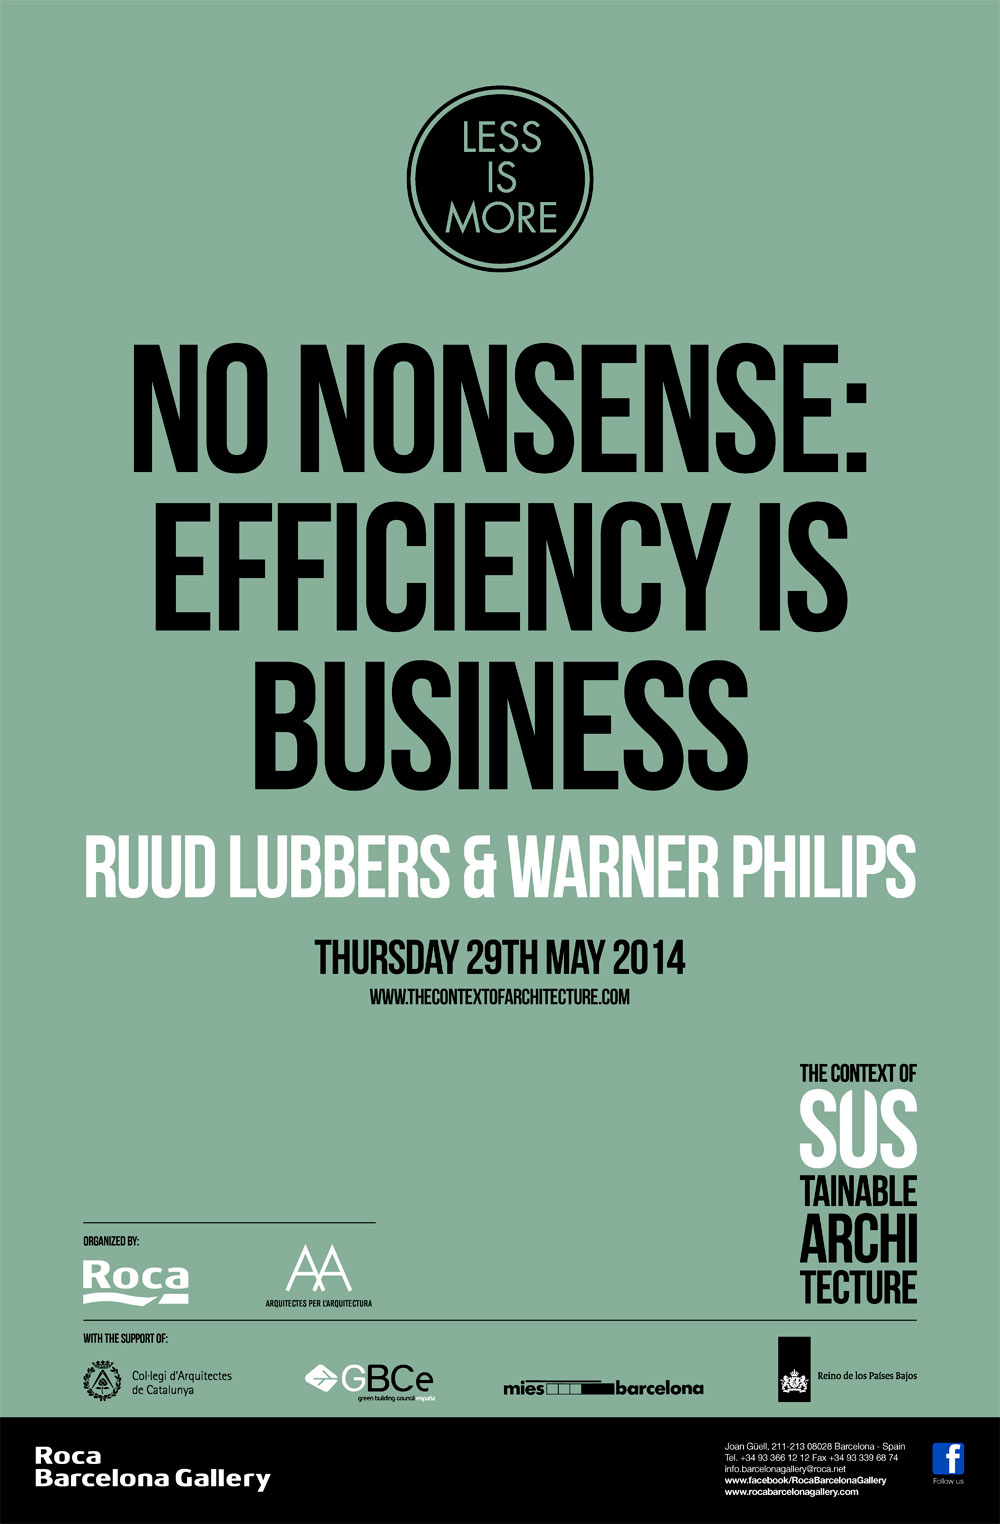 No nonsense, efficiency is business | Ruud Lubbers & Warner Philips | The Context of Sustainable Architecture